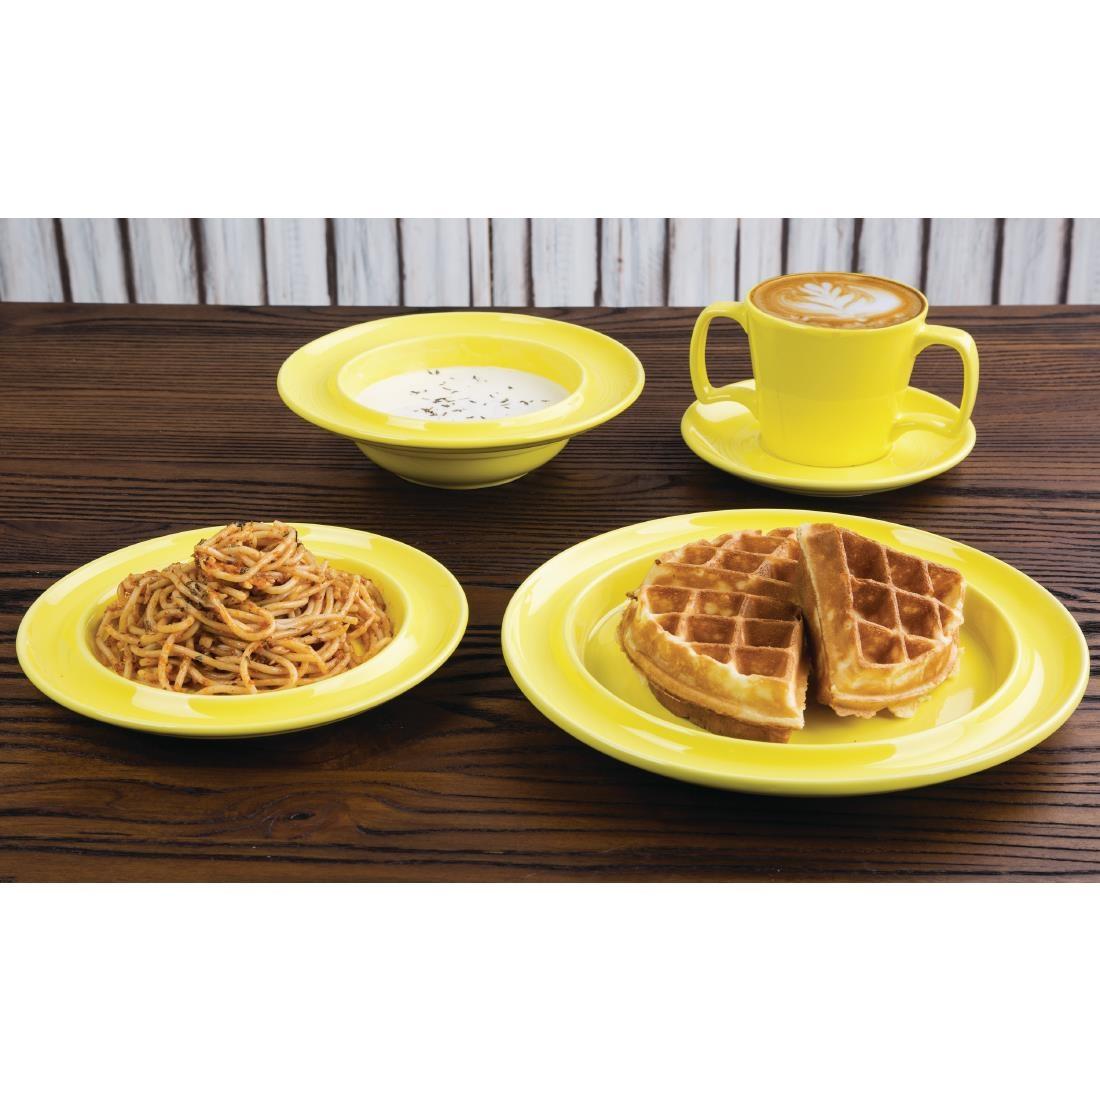 Olympia Heritage Double Well Saucers Yellow 163mm (Pack of 6) - DW151  - 6